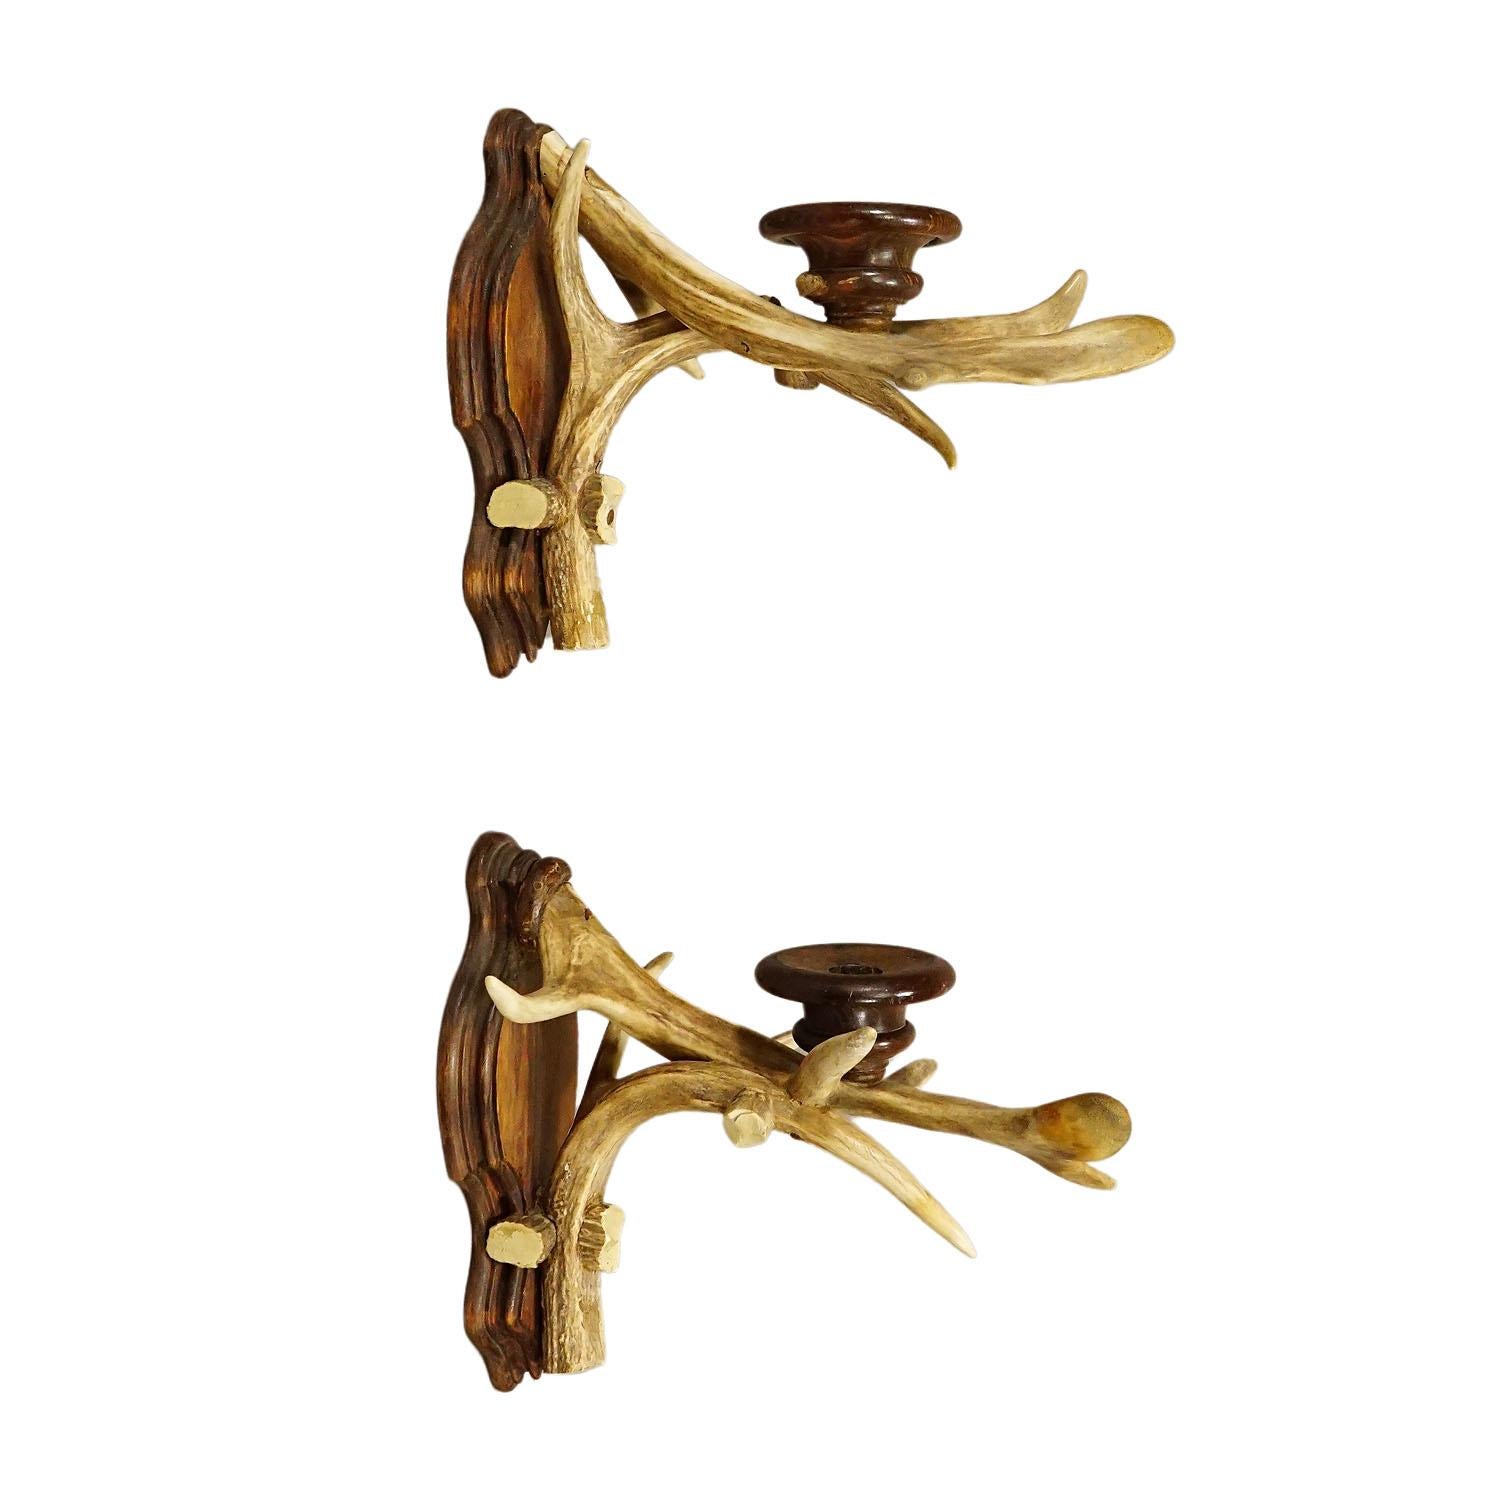 A Pair Black Forest Candle Sconces with Deer Horns, Germany ca. 1920
Item e6862
An antique pair of Black Forest sconces for candles. Each made of original deer horns which are mounted on a carved wooden base. Spouts made of turned wood. Executed in